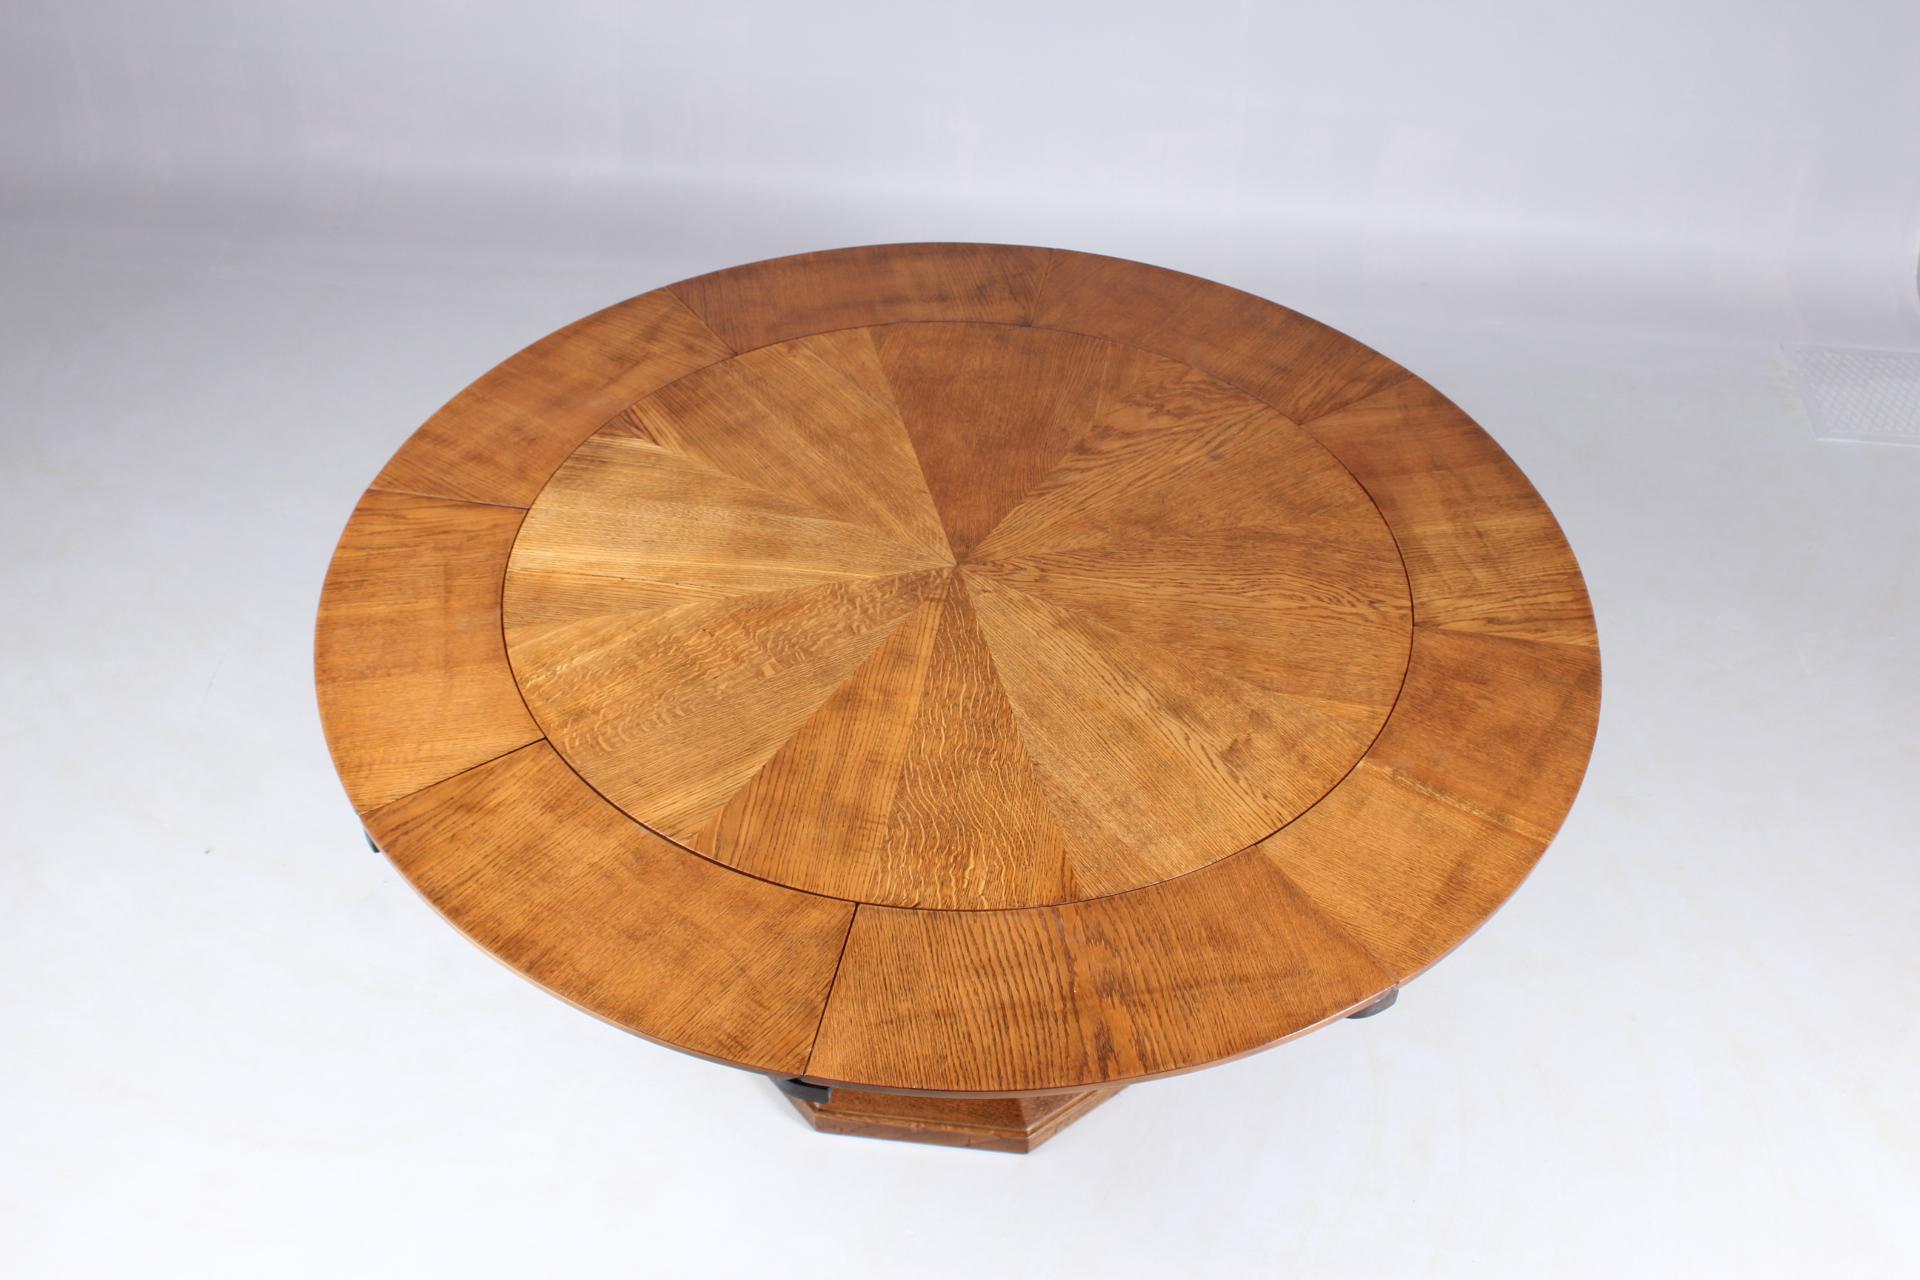 Early 20th Century Round Oak Dining Table, Very Rare Enlarging Mechanism, Patented in 1920